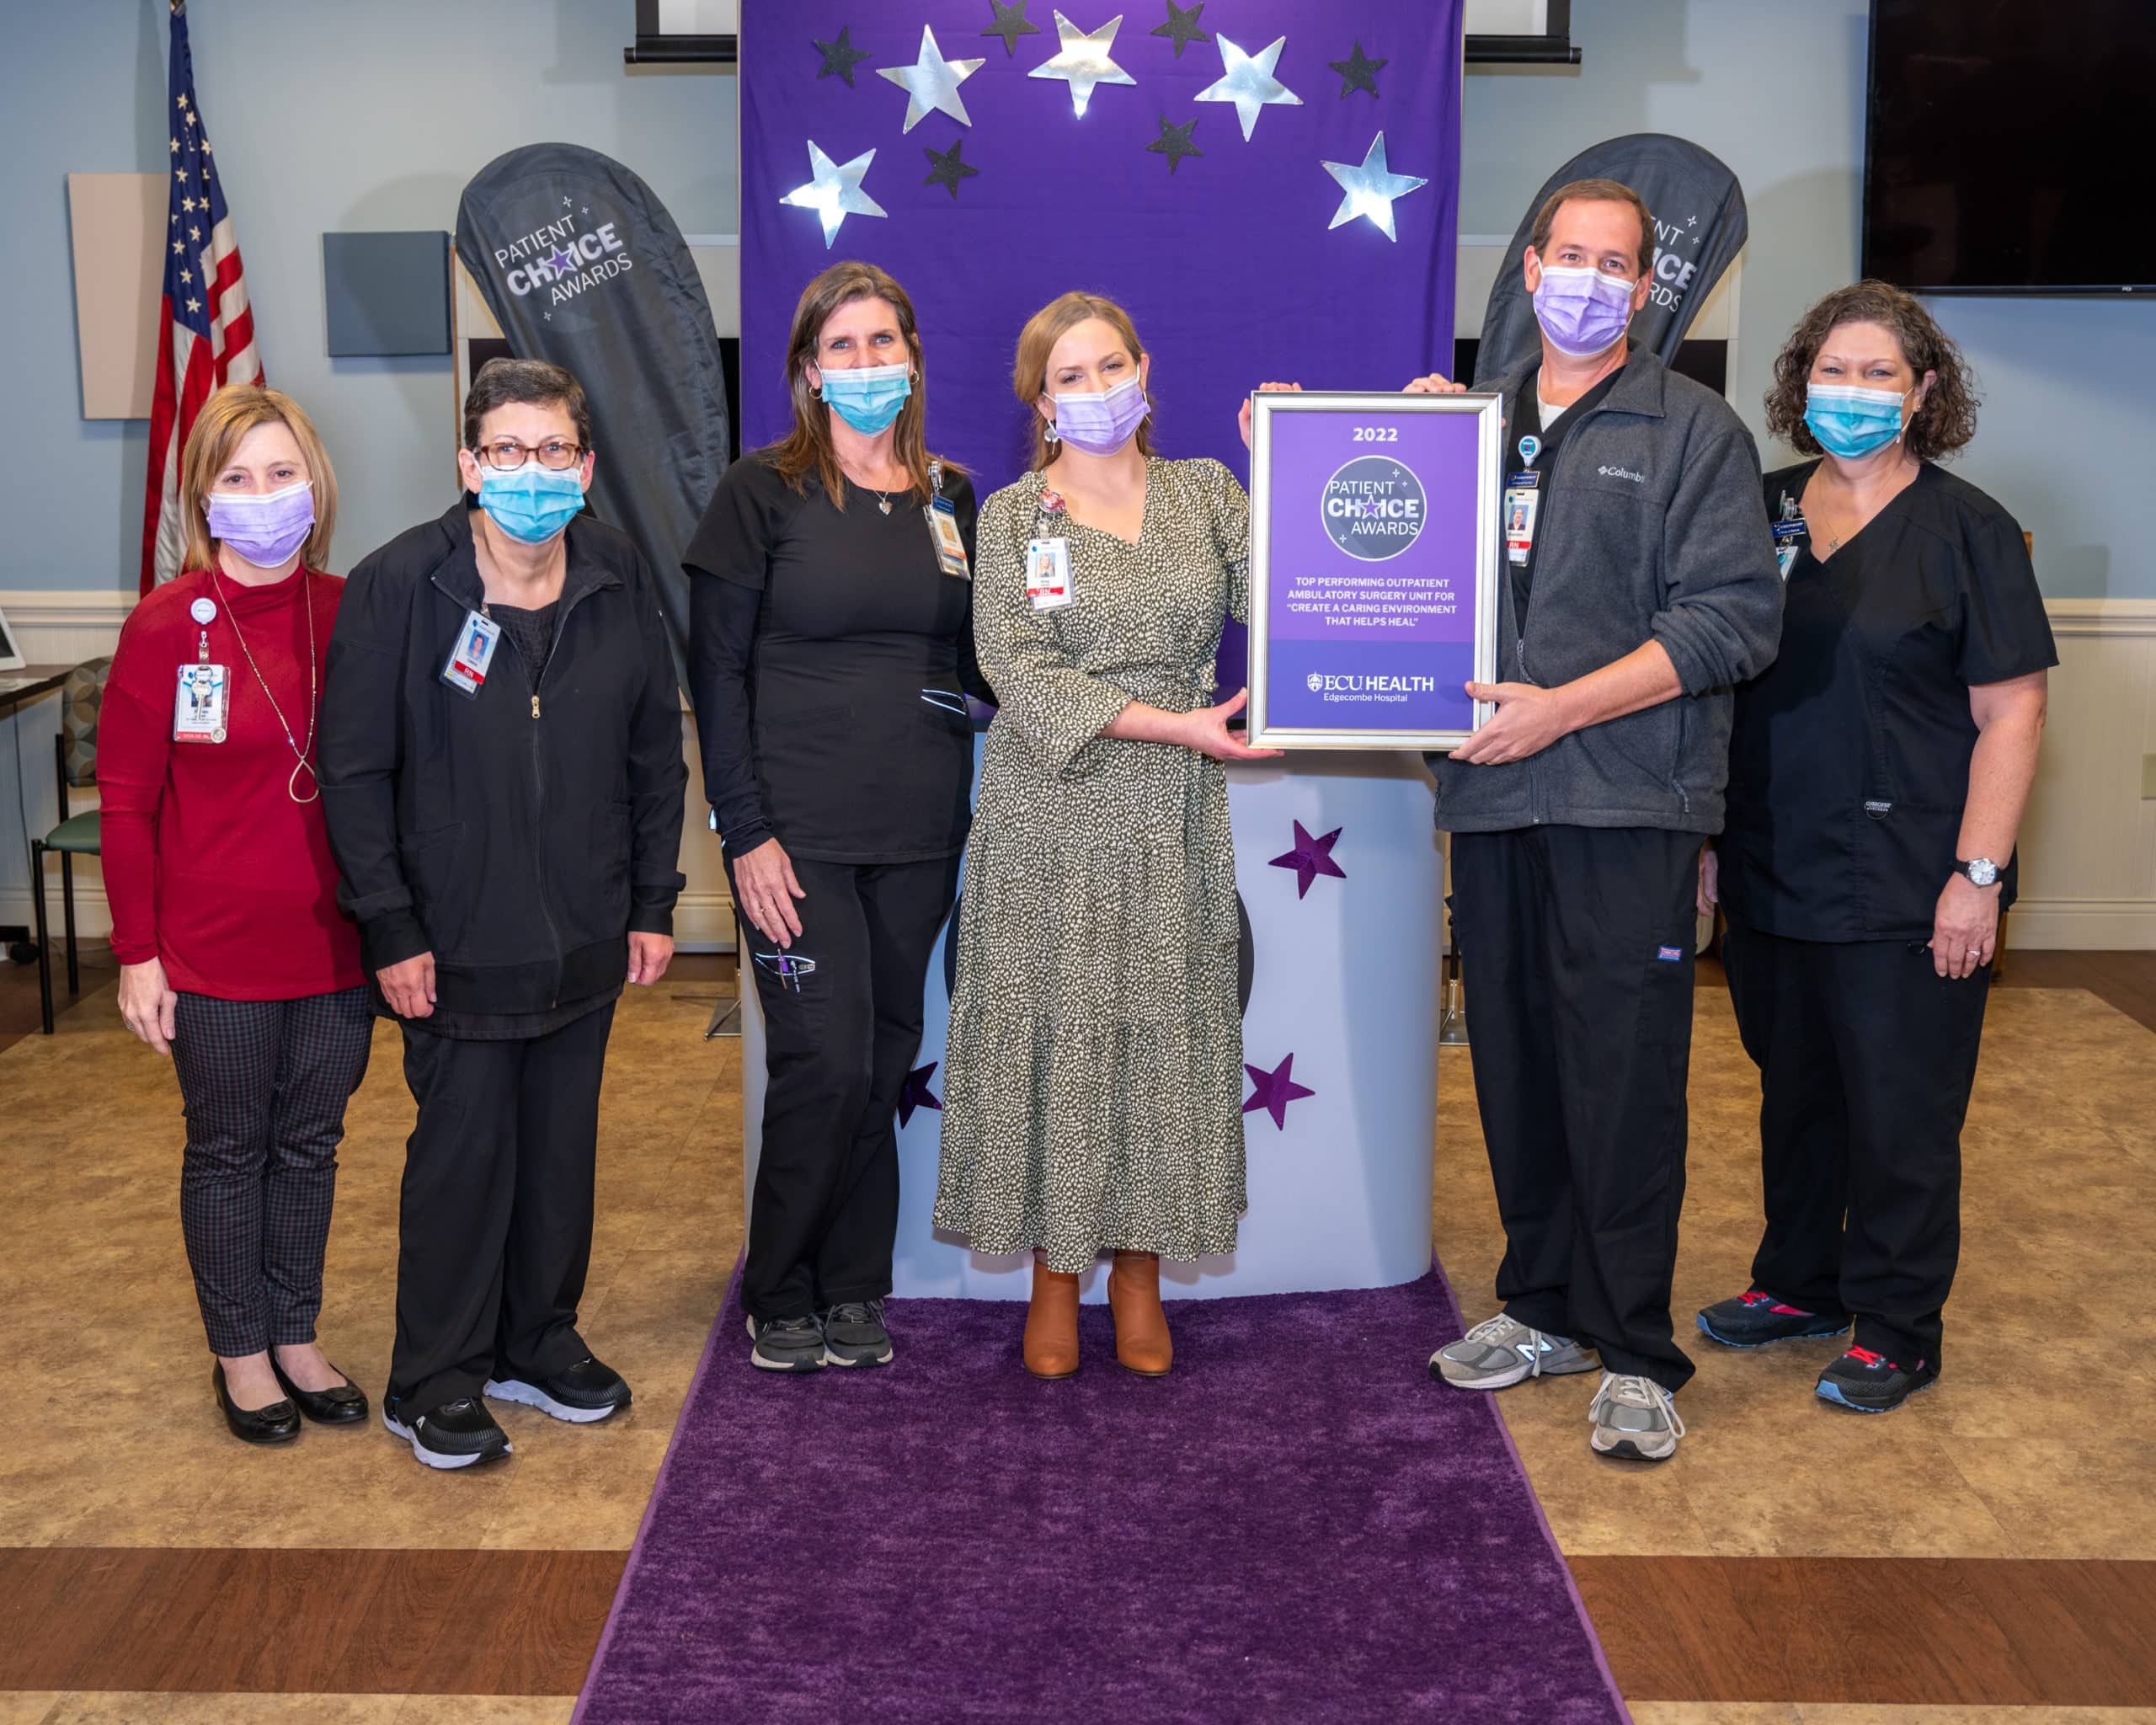 The ECU Health Edgecombe Hospital – Ambulatory Surgery Unit team poses for a photo after earning the Patient Choice Award for Top Performing Ambulatory Surgery Unit for Creating a Caring Environment that Helps Heal.